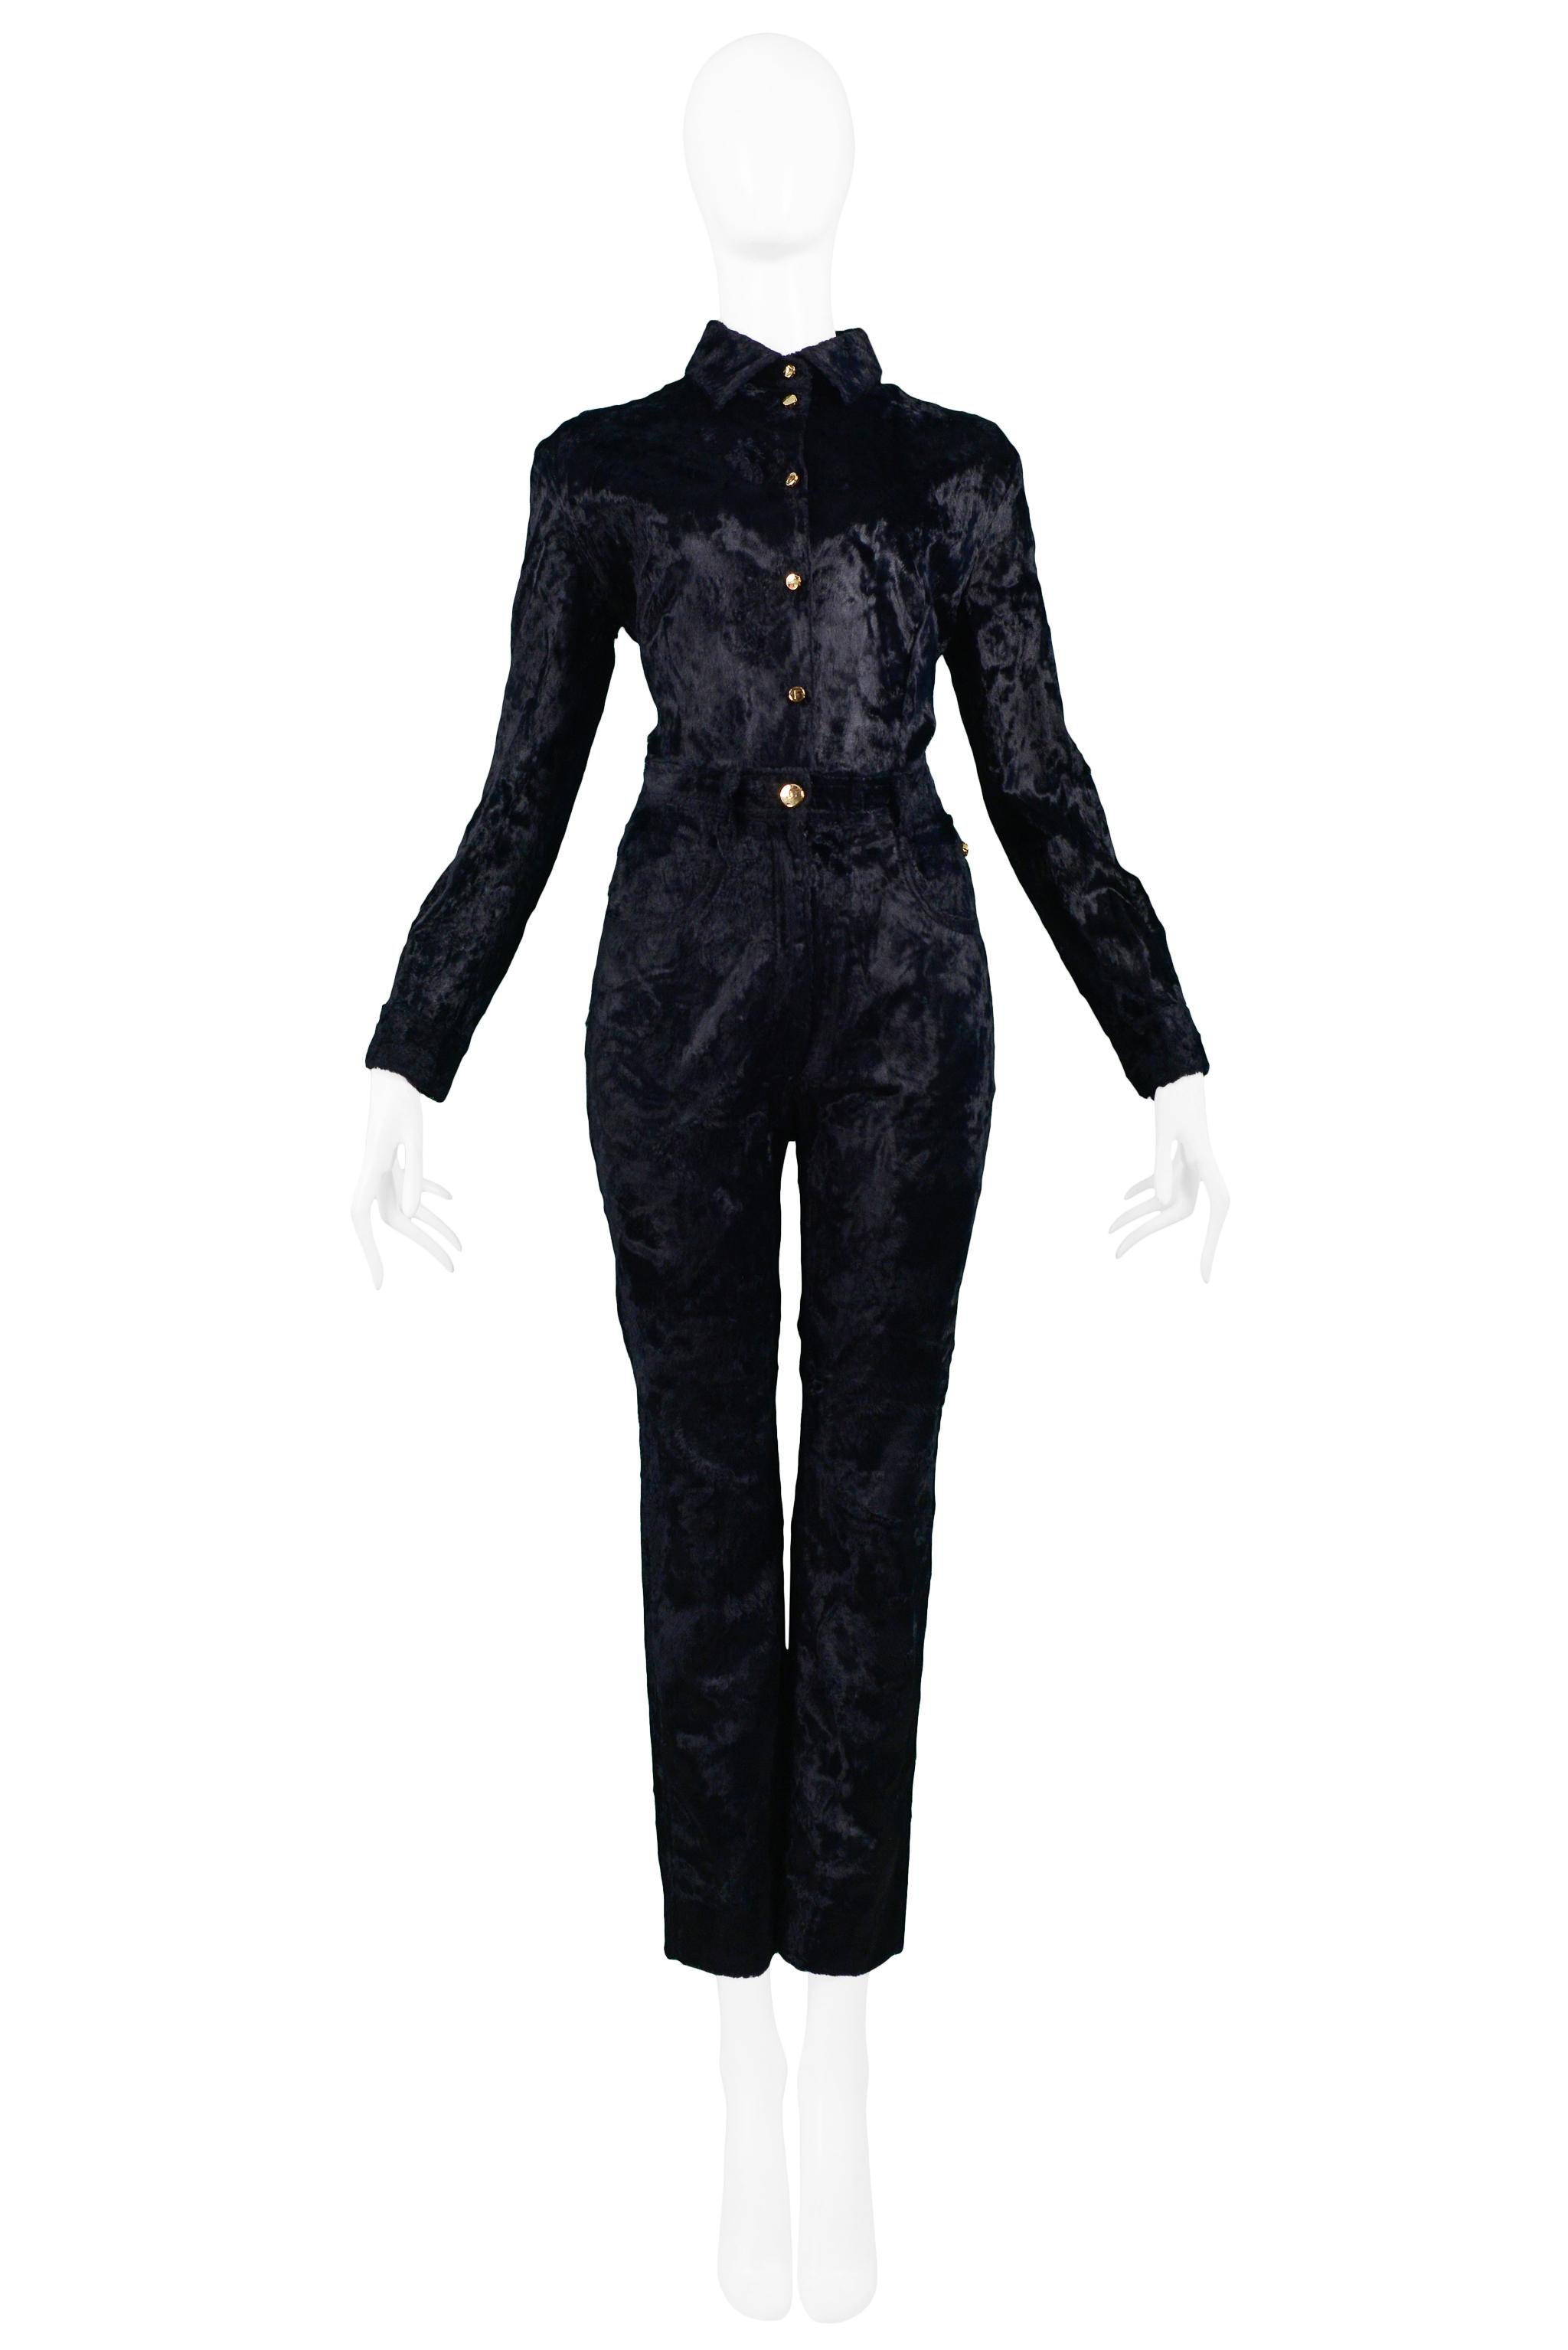 Resurrection Vintage is excited to offer a vintage Gianfranco Ferre black faux fur velvet bodysuit and pant ensemble. The bodysuit top features gold buttons at center front and black double knit panel at back. The pants are high waisted with a